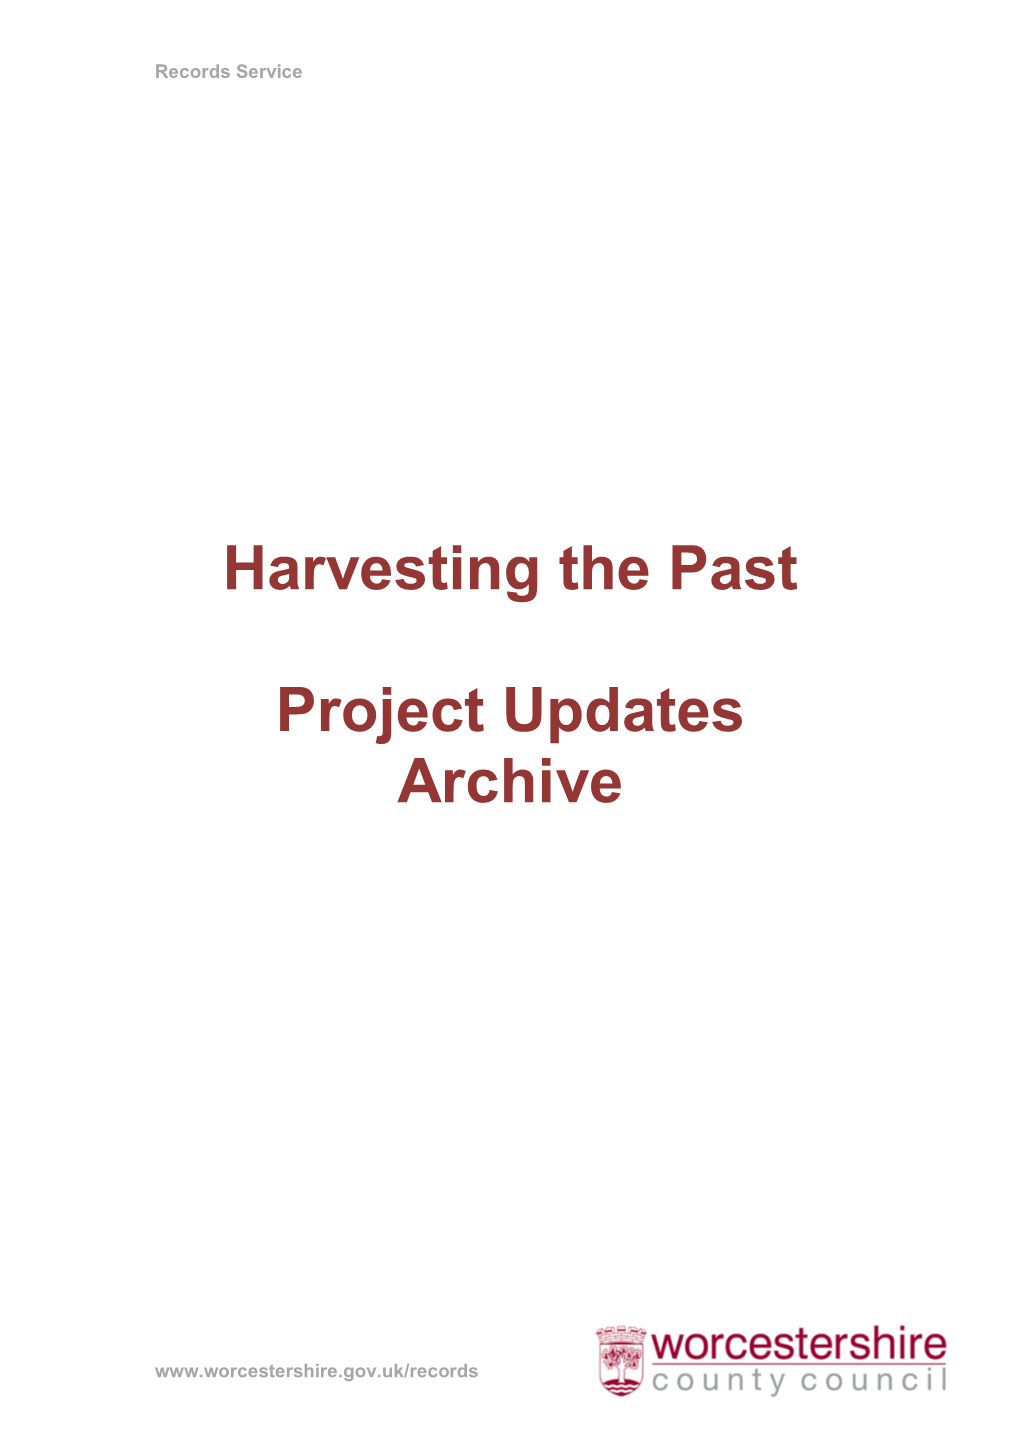 Harvesting the Past Project Updates Archive